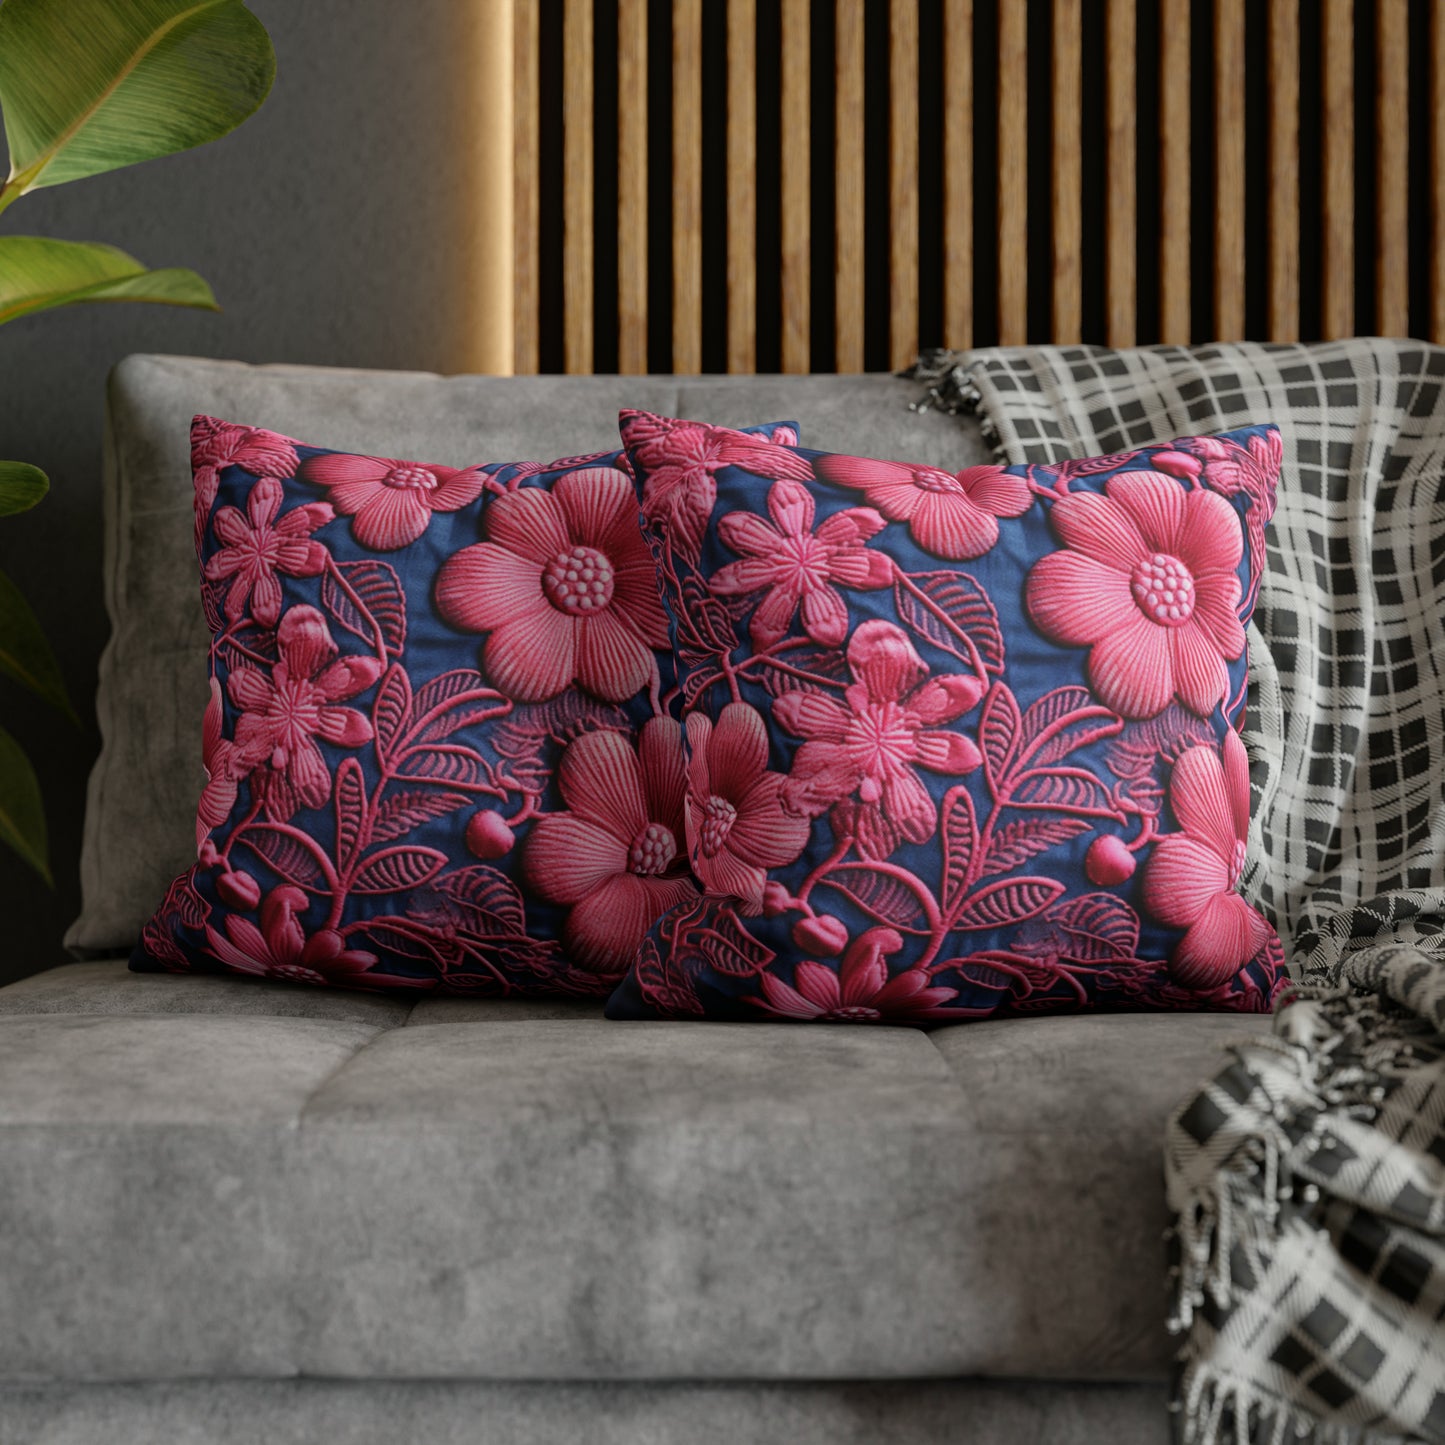 Denim Blue Doll Pink Floral Embroidery Style Fabric Flowers - Spun Polyester Square Pillow Case